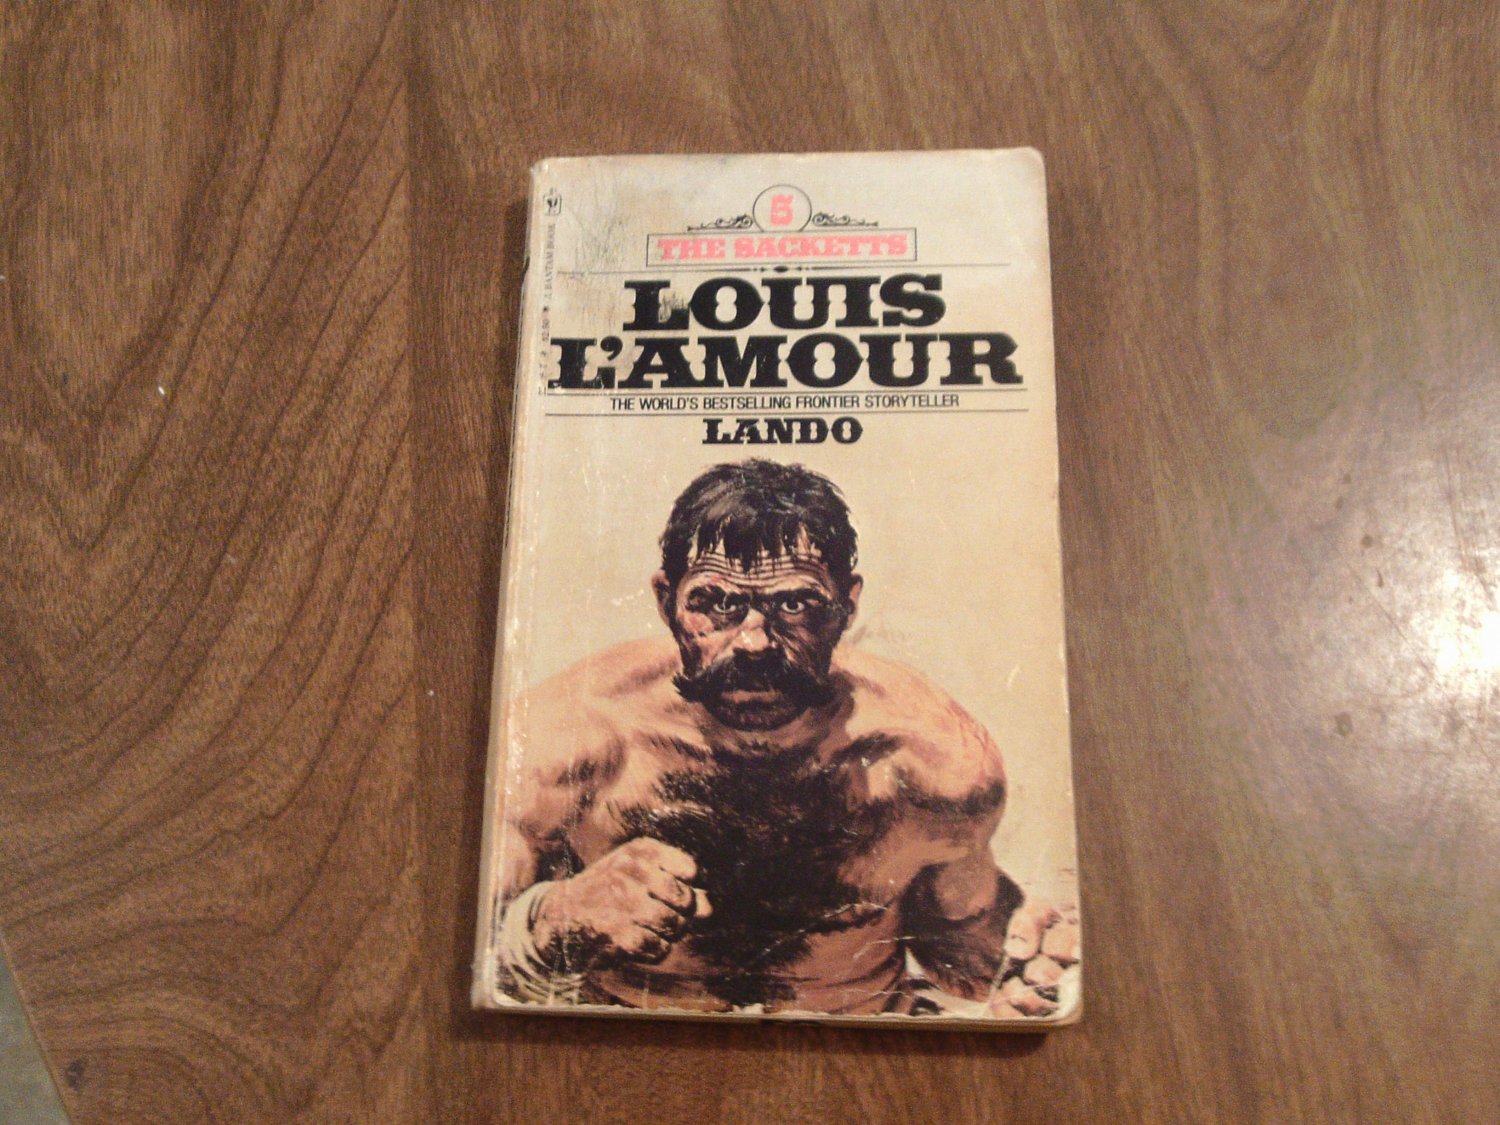 Lando by Louis L'Amour (1981)The Sacketts #7 (B11) Western